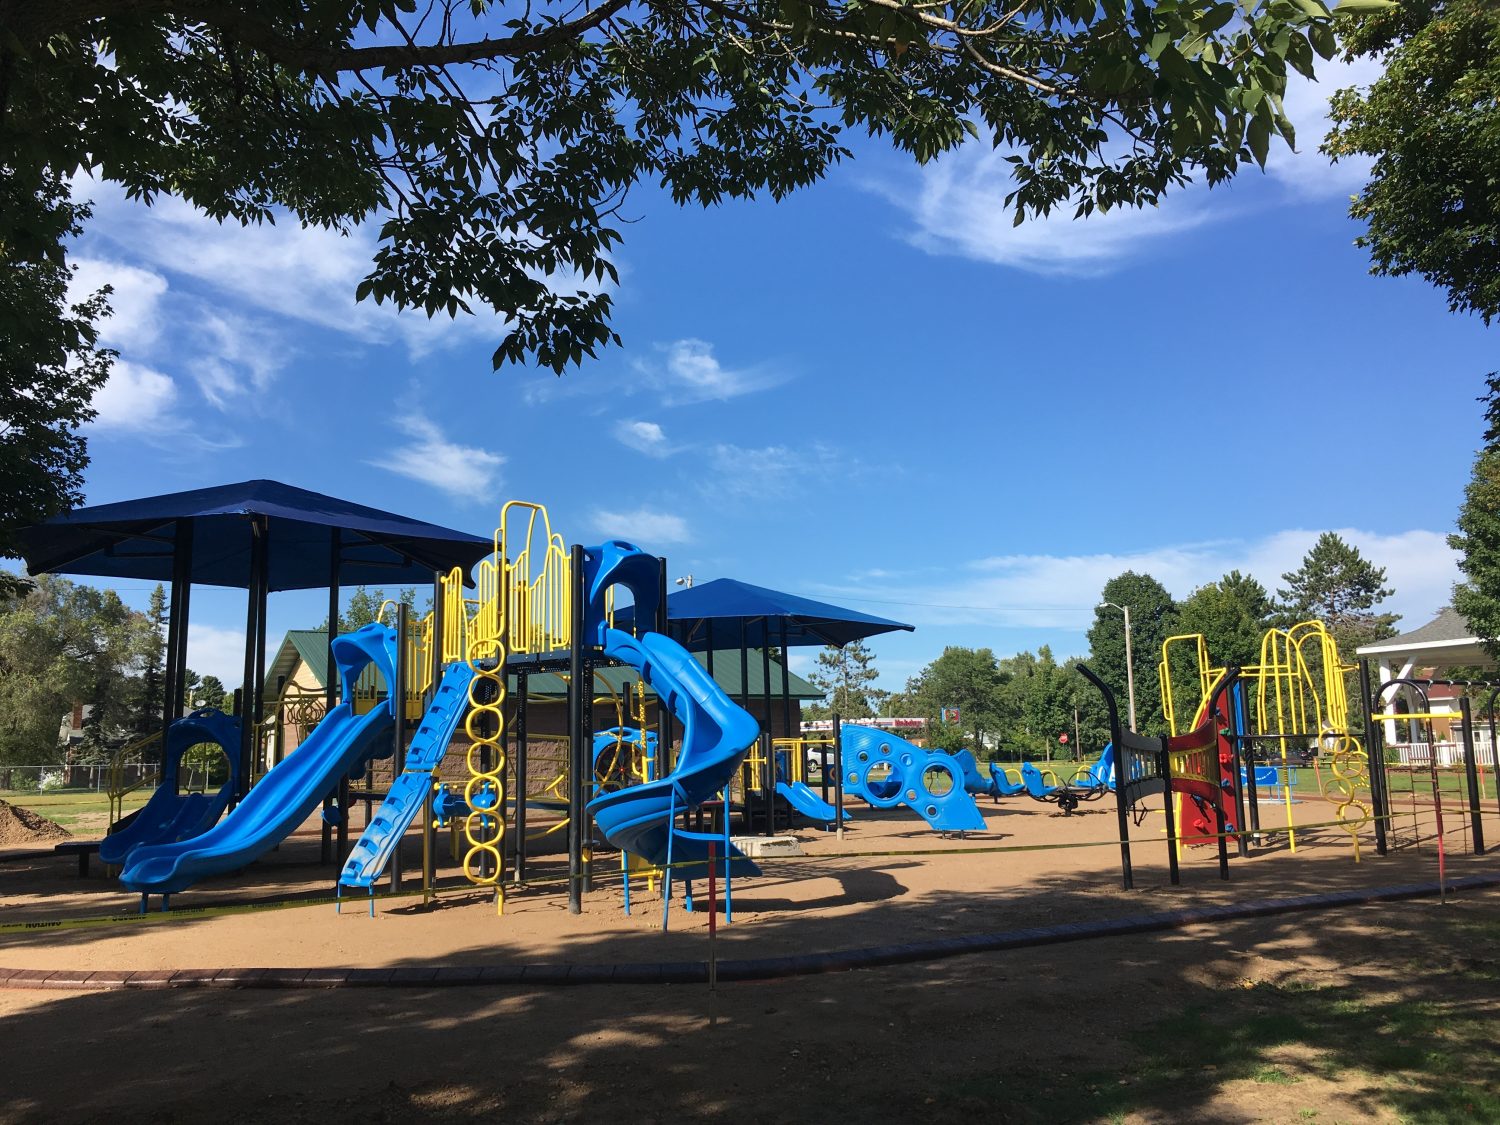 Normal Park Playground project nears completion